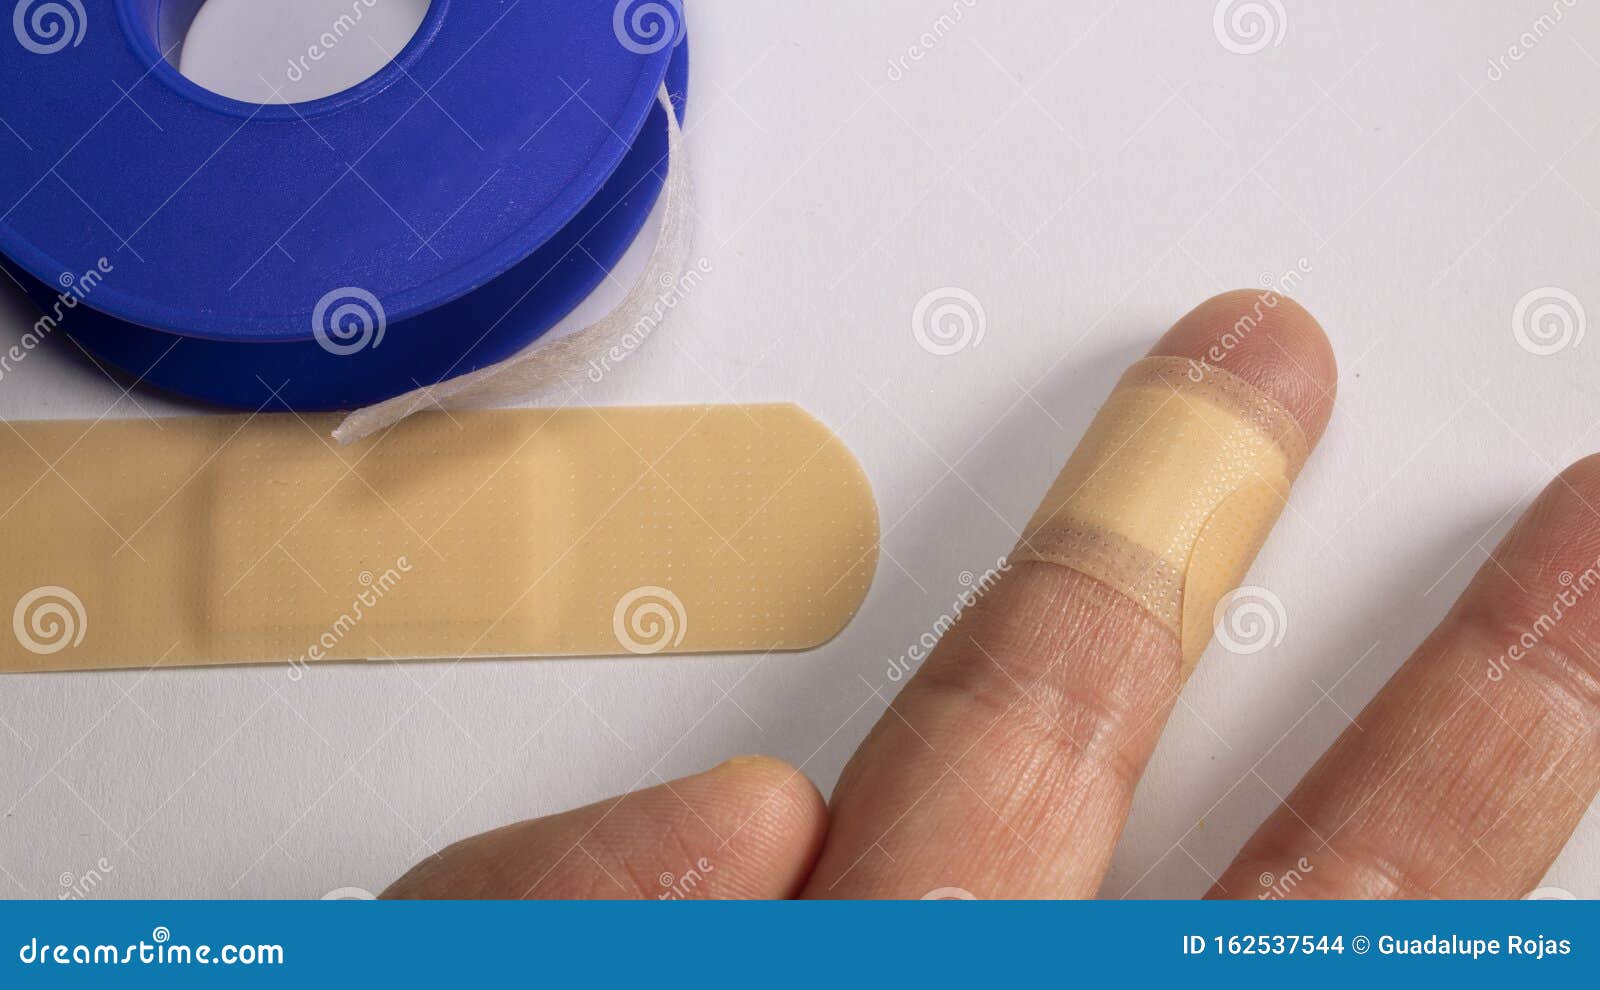 adhesive bandage for minor cuts. a collection of adhesive bandages